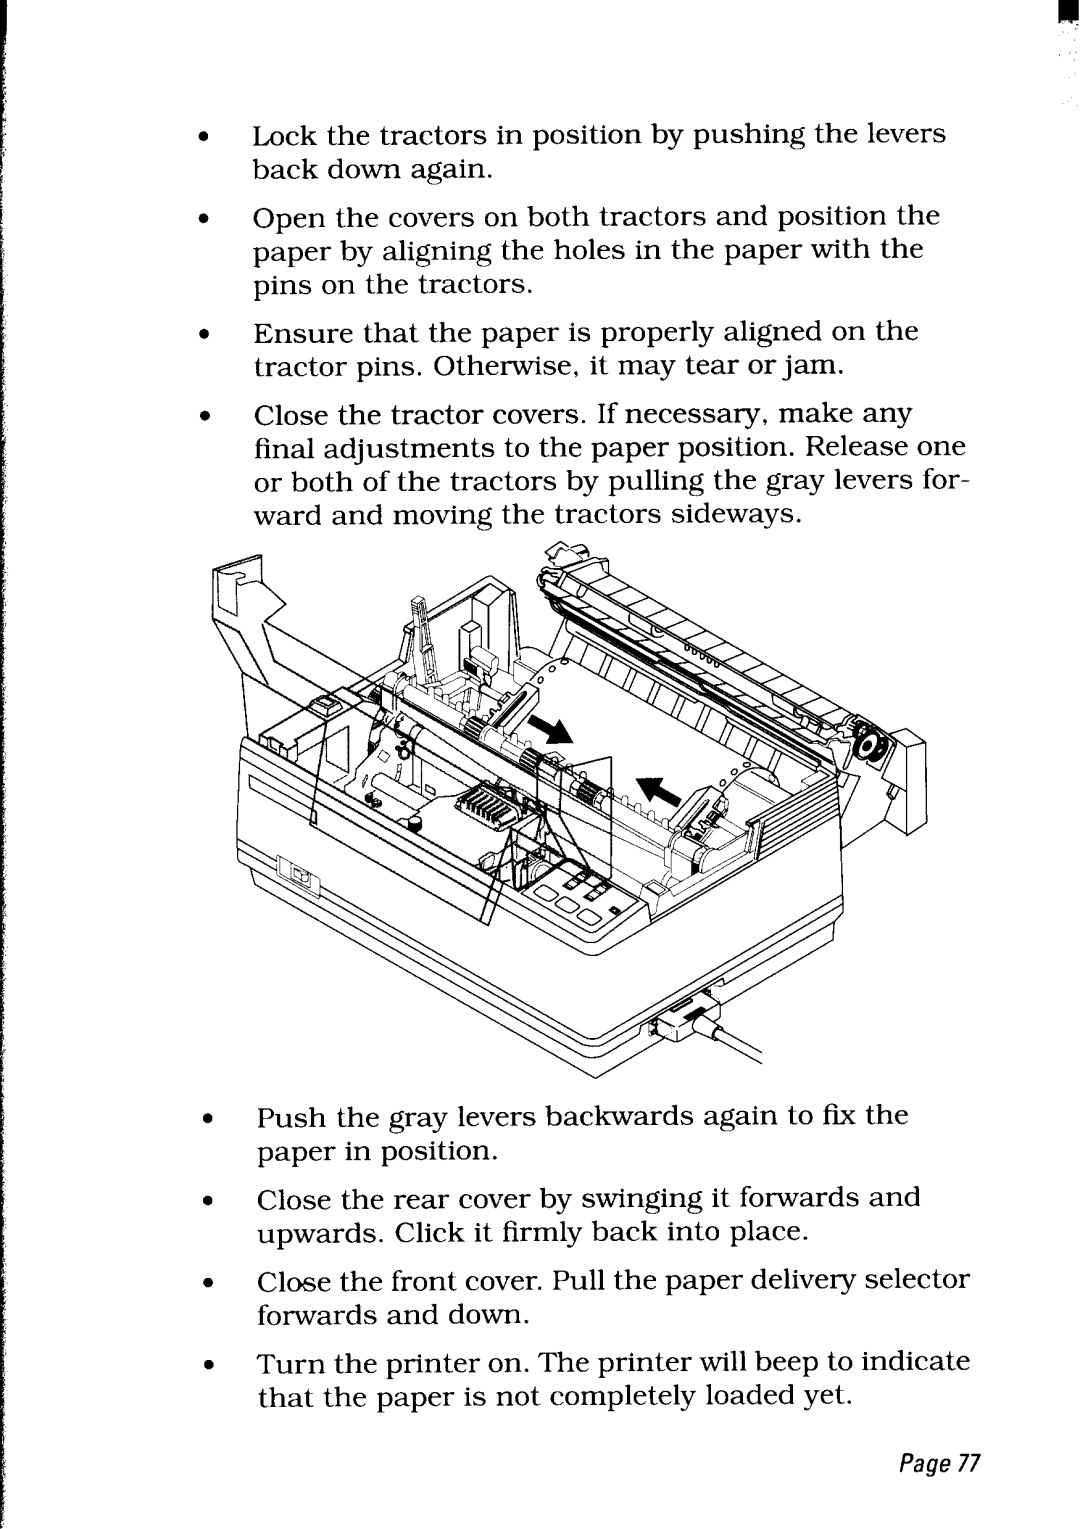 Star Micronics LC24-30 user manual Lock the tractors in position by pushing the levers back down again 